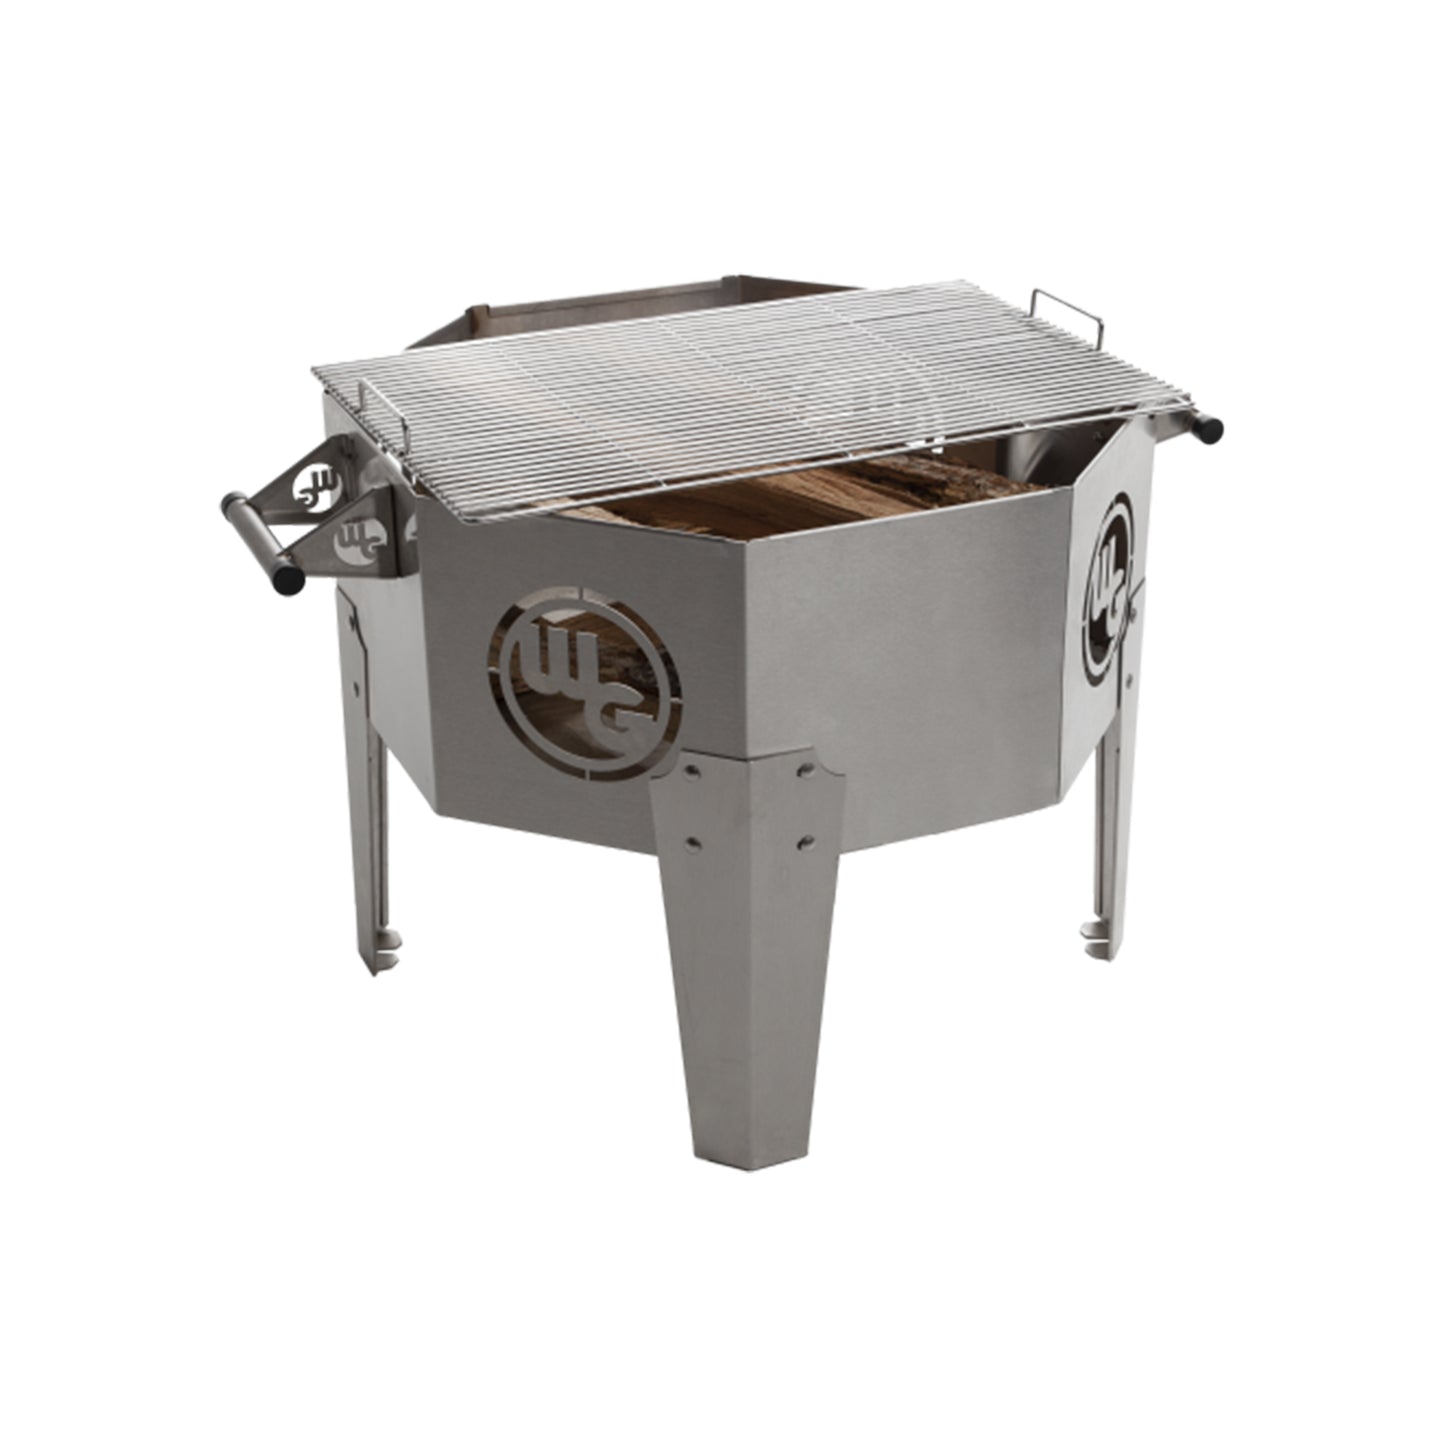 Wilmington Grill Wood Burning Fire Pit